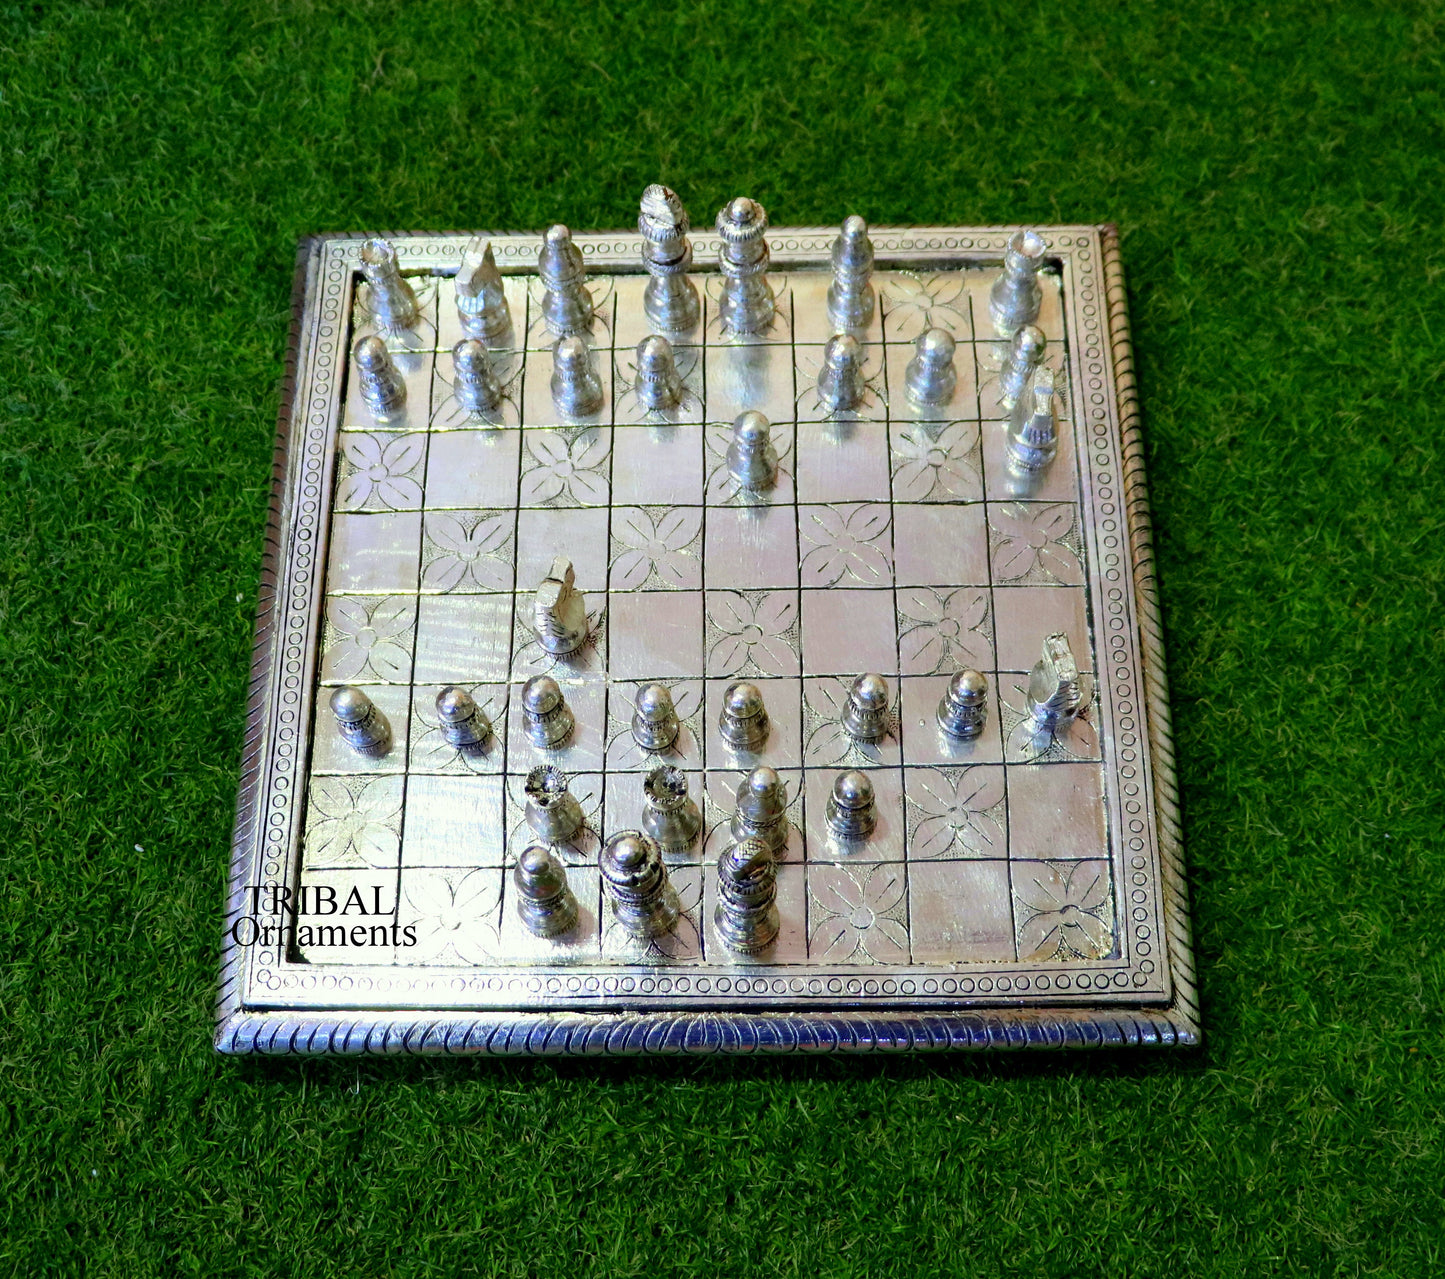 12" x 12" 925 sterling silver chessboard, Amazing customized handcrafted design on wooden base, Amazing Royal silver gift article india sf10 - TRIBAL ORNAMENTS